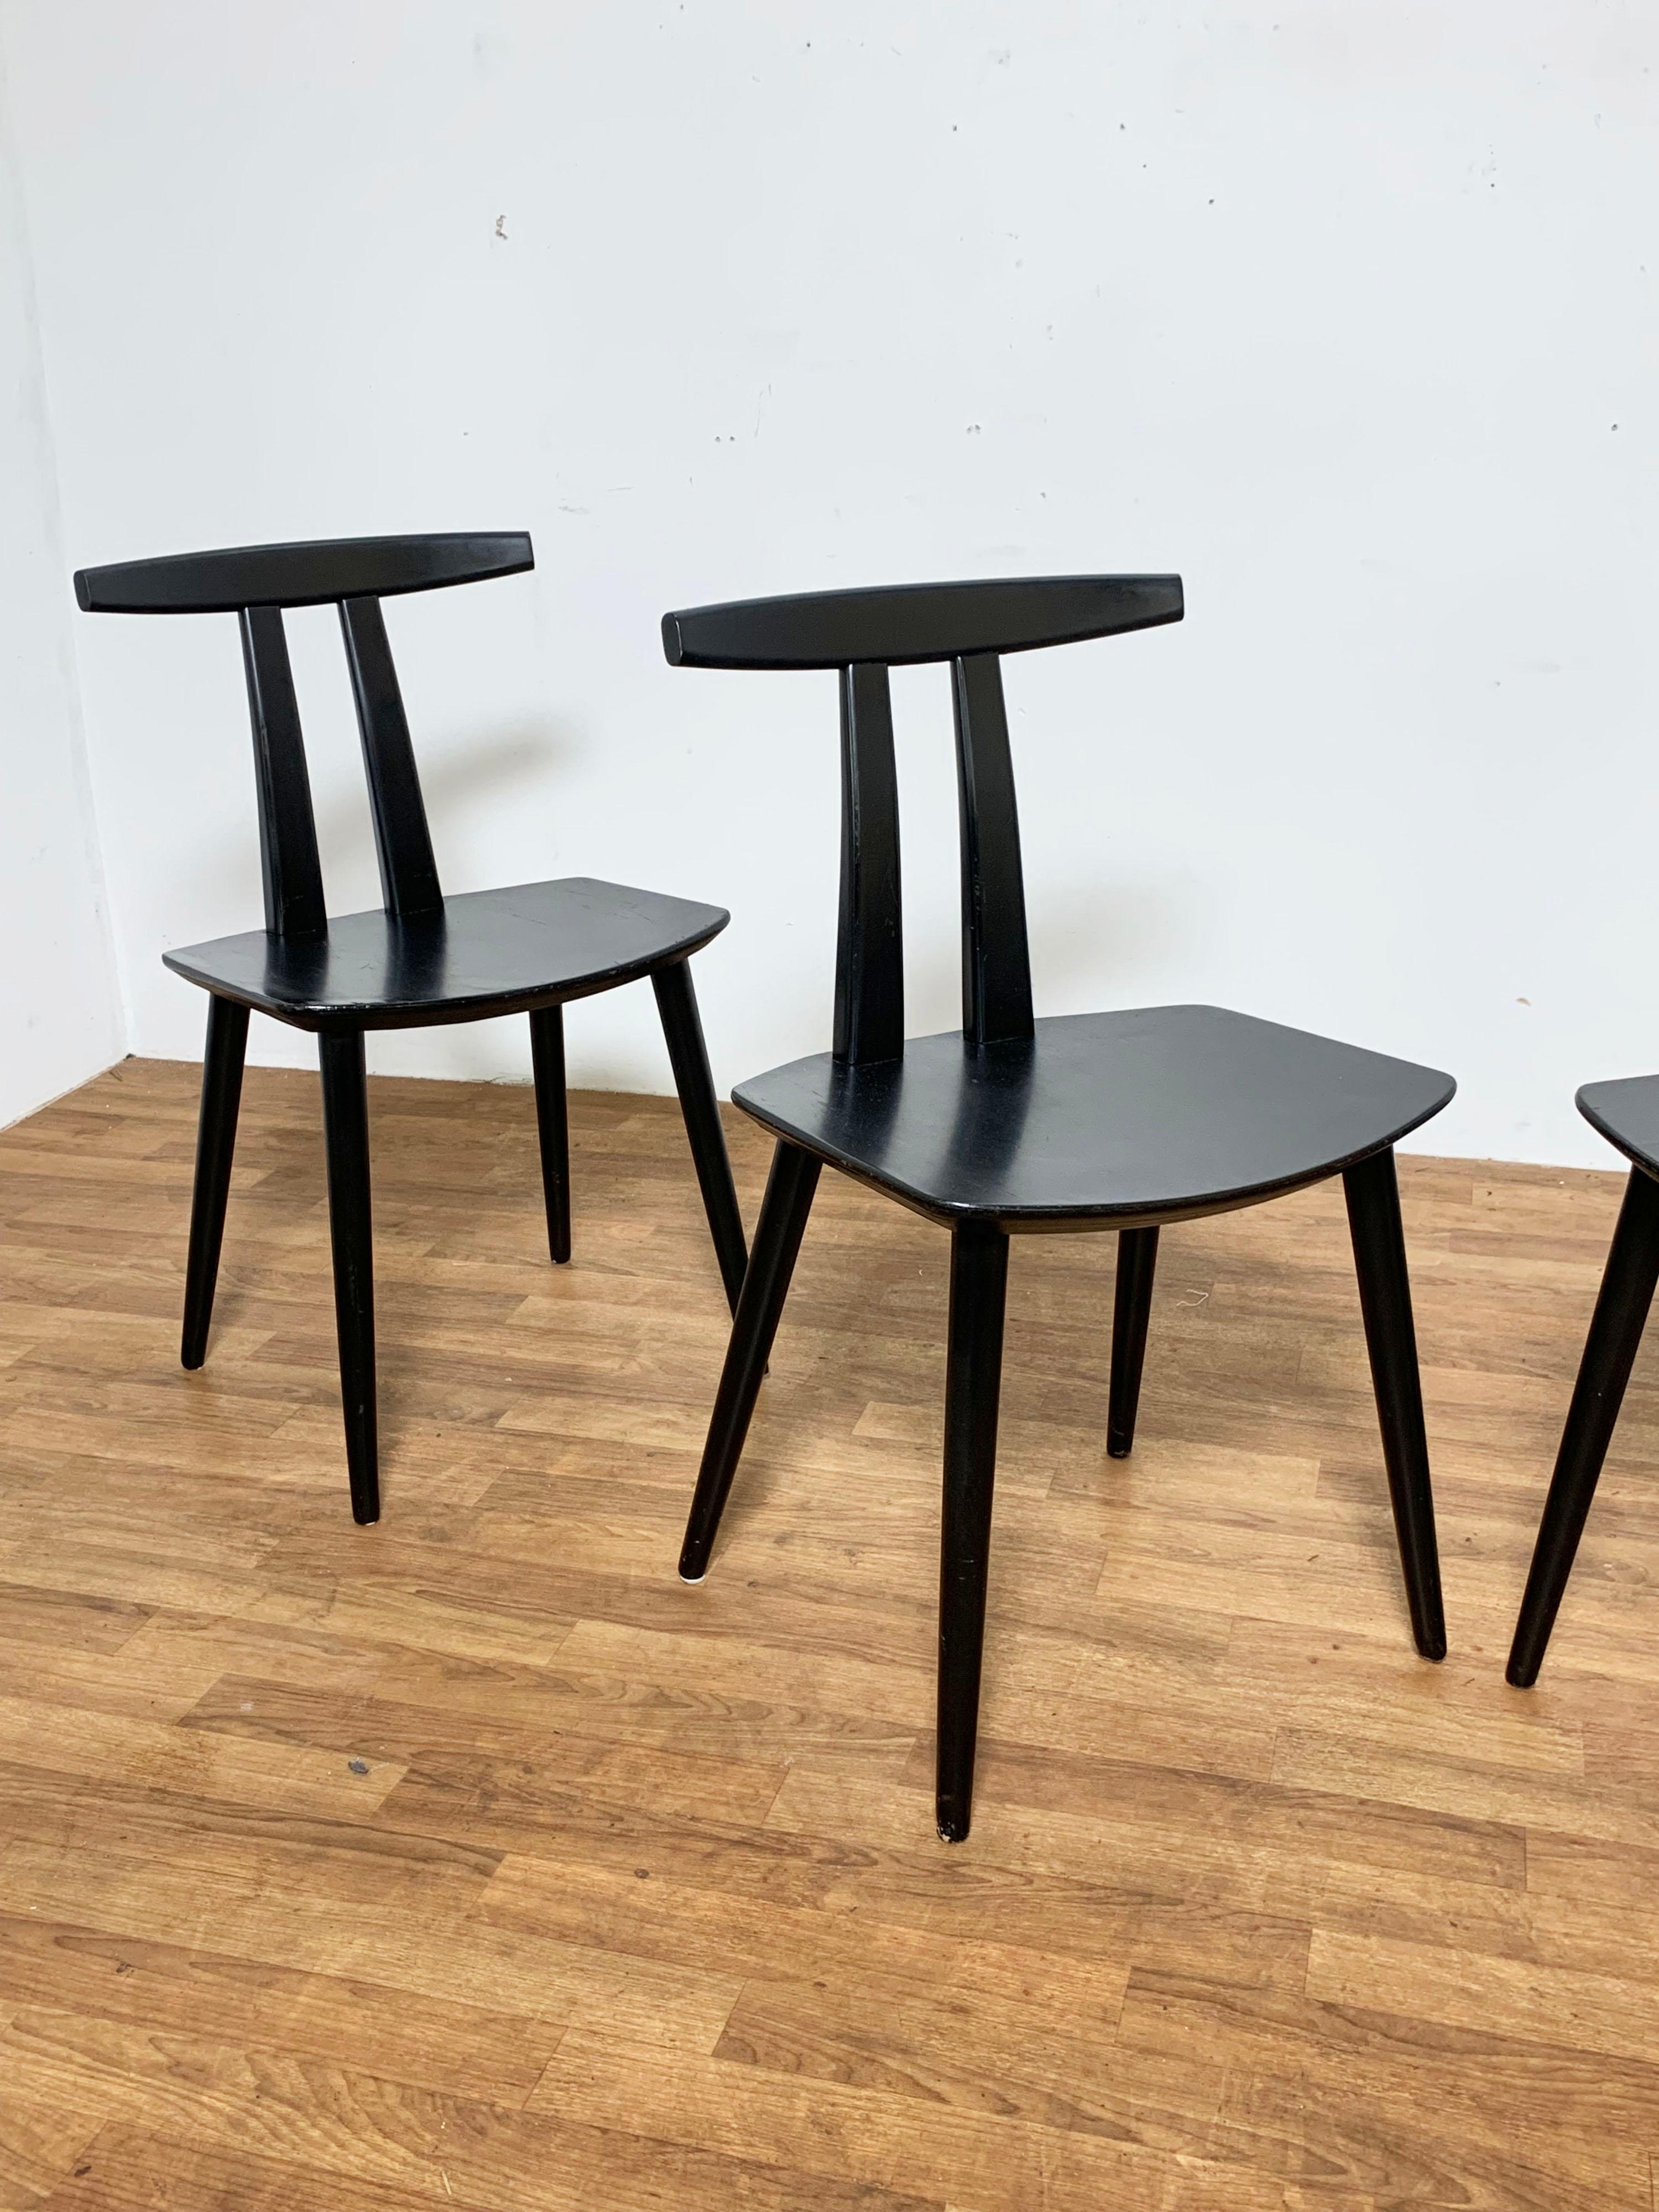 Set of four side dining chairs designed by Folke Palsson for FDB Mobler, Denmark, circa 1960s. Often referred to as the 